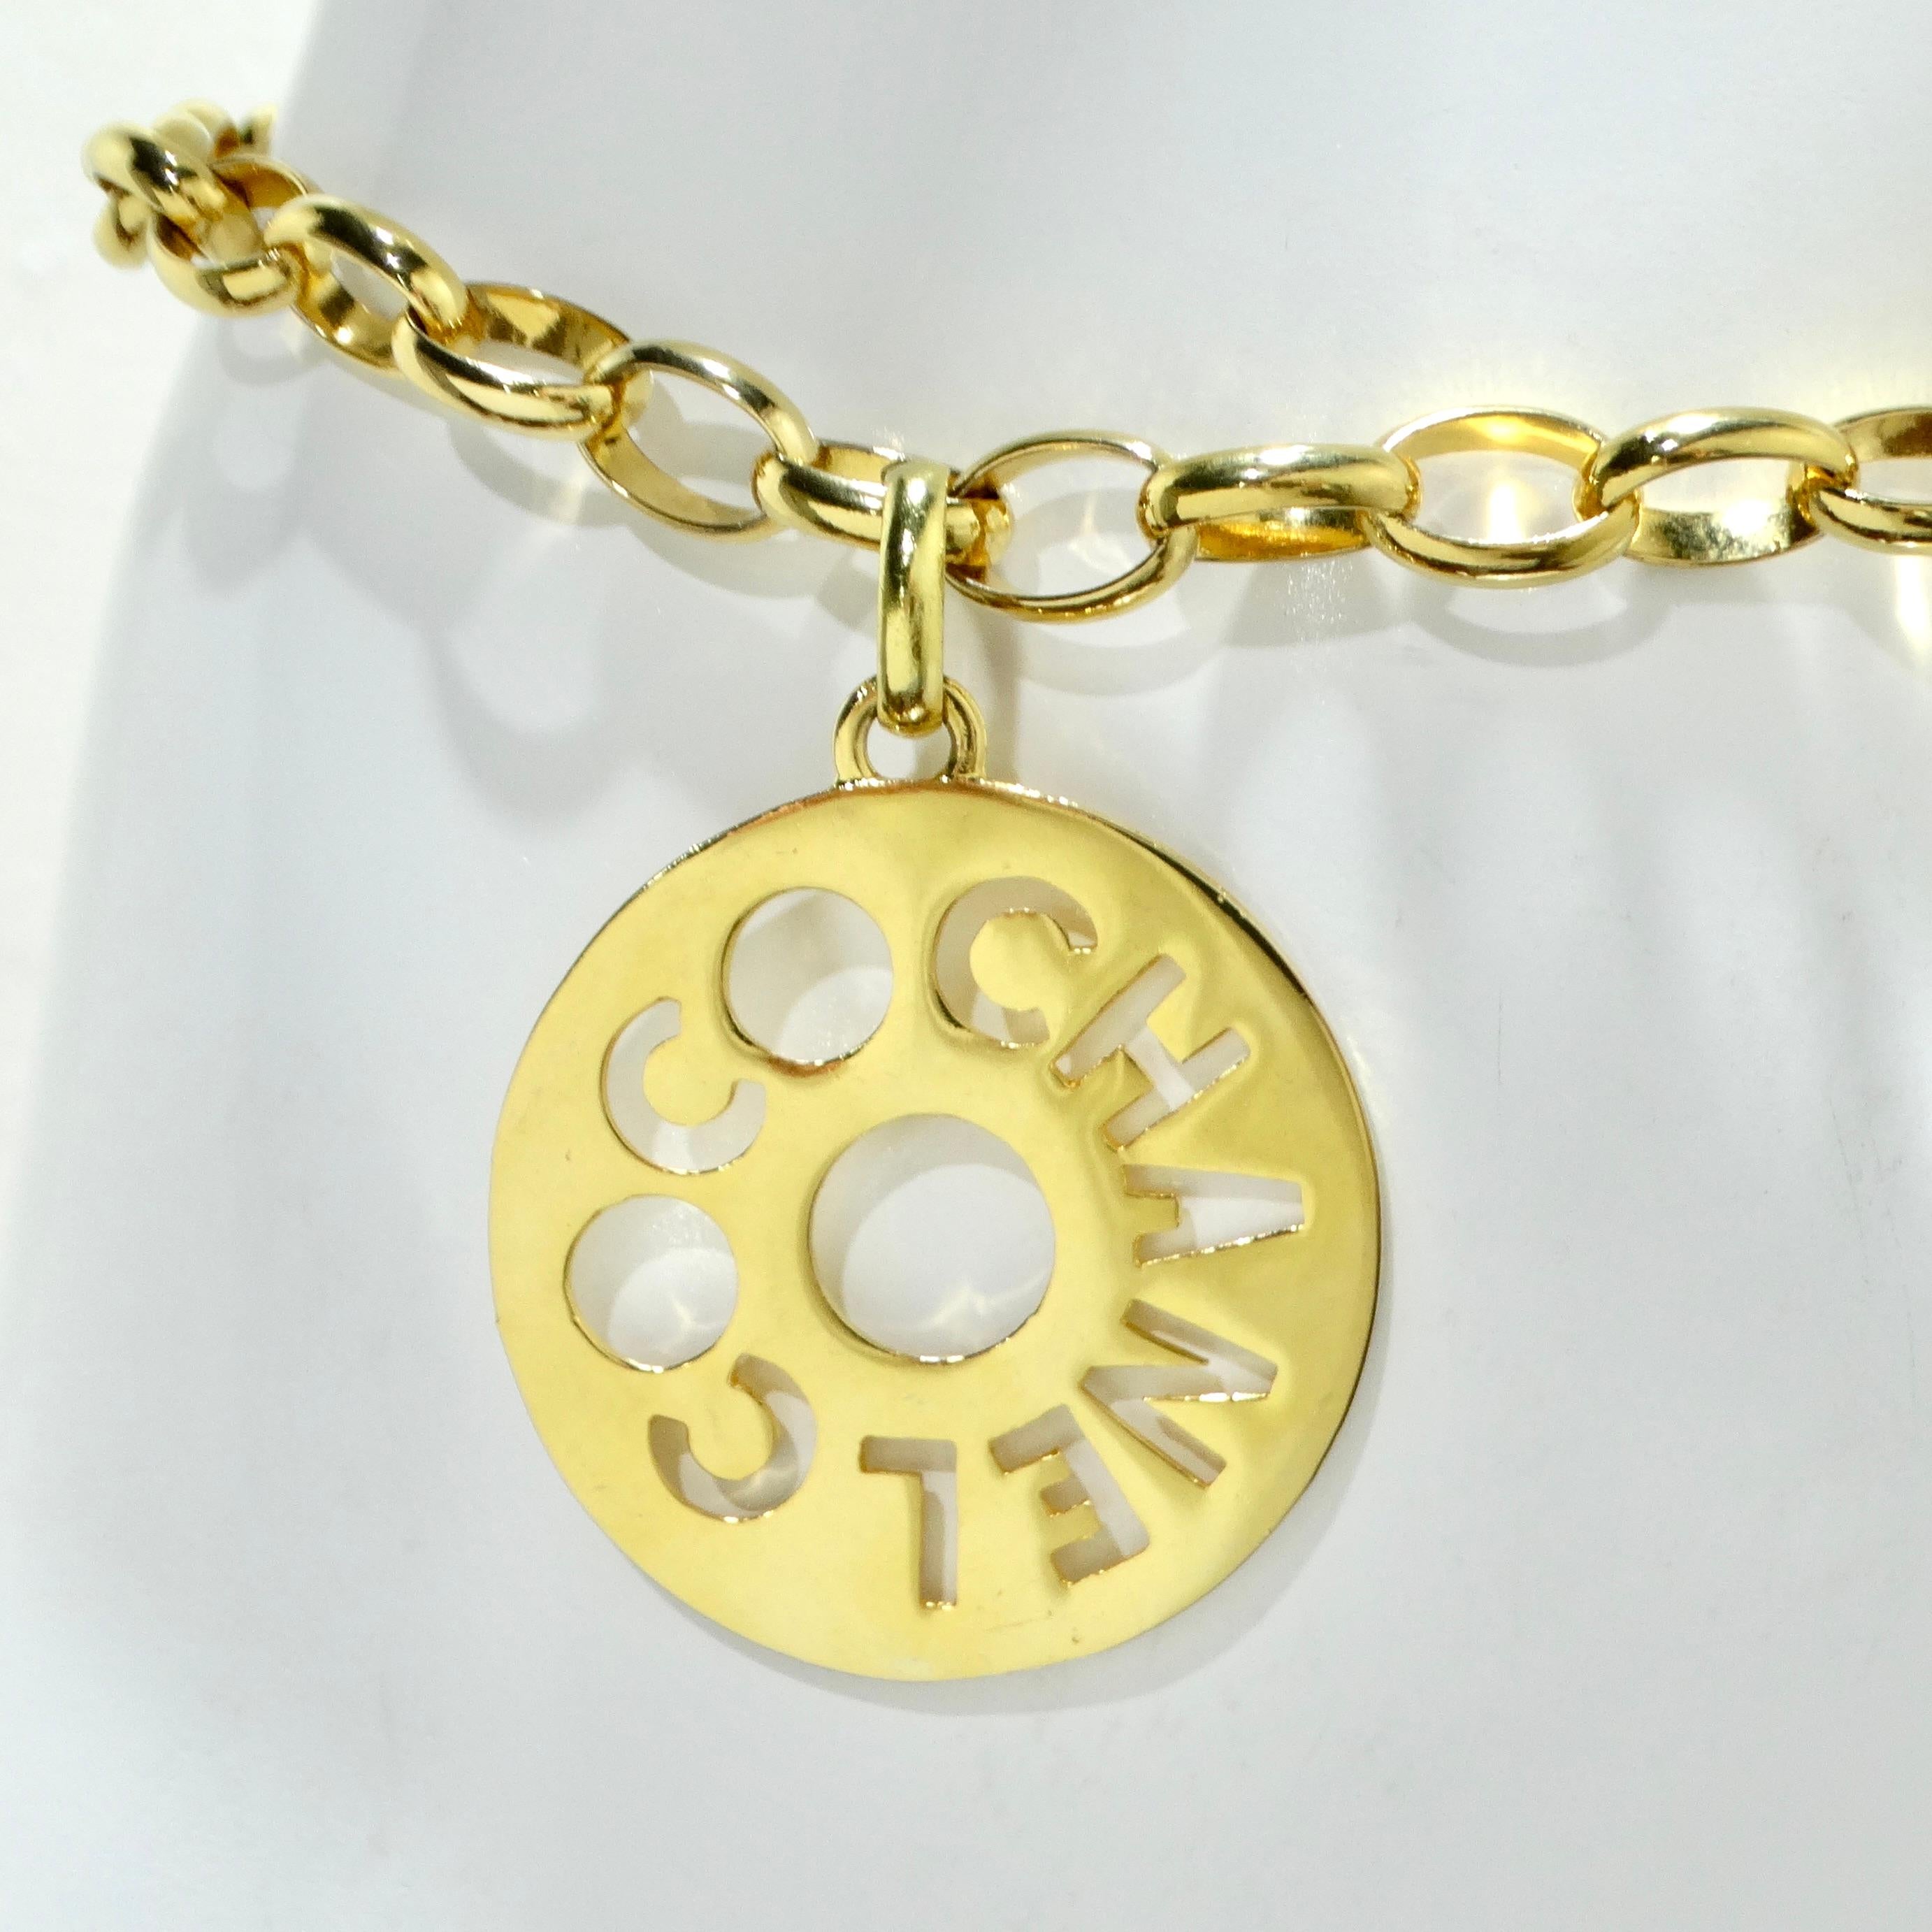 Chanel 1970s Gold Tone Oversize Pendant Necklace For Sale 6